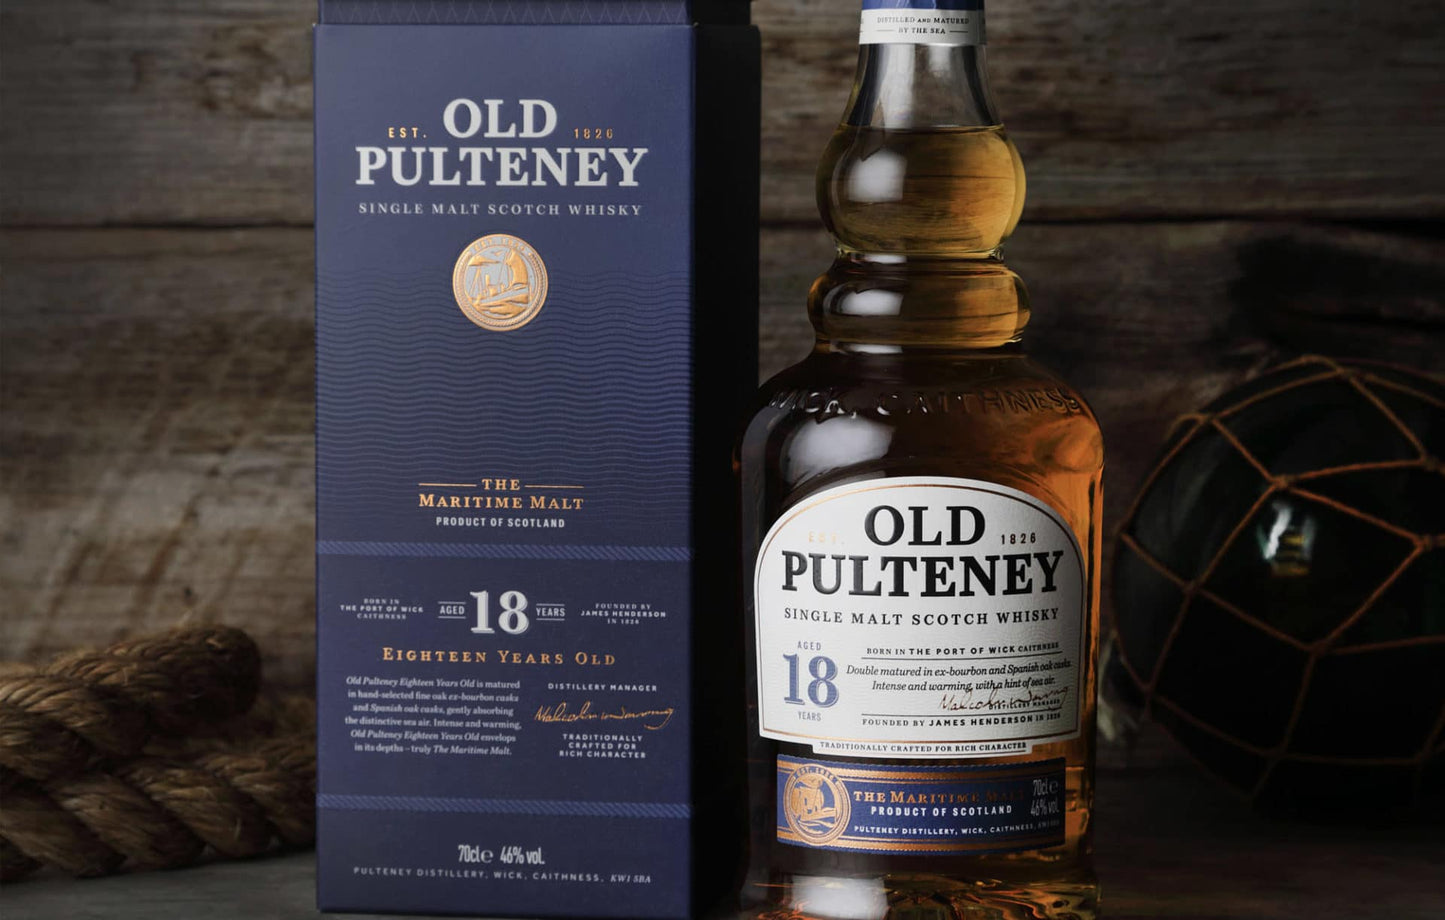 Old Pulteney 18 Year Old Single Malt Whisky (70cl; 46%)